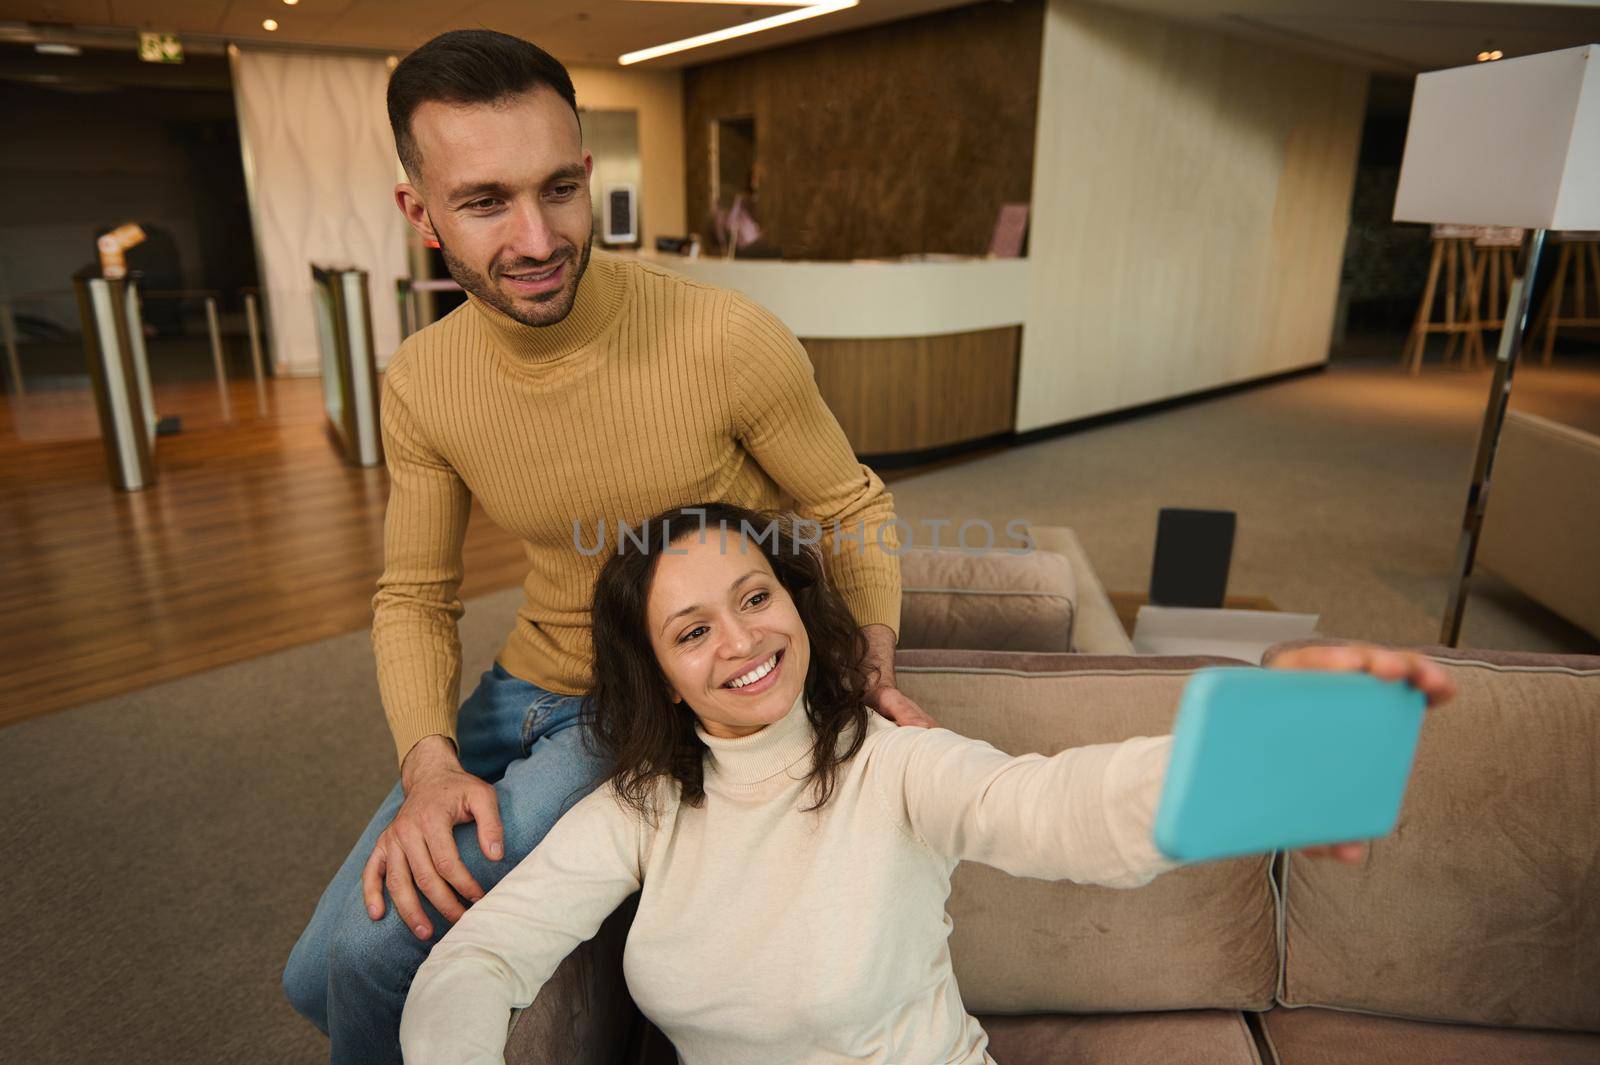 Attractive Hispanic woman sitting next to her boyfriend and making a self-portrait on smartphone while resting together in the lounge zone of the airport departure terminal while waiting for a flight